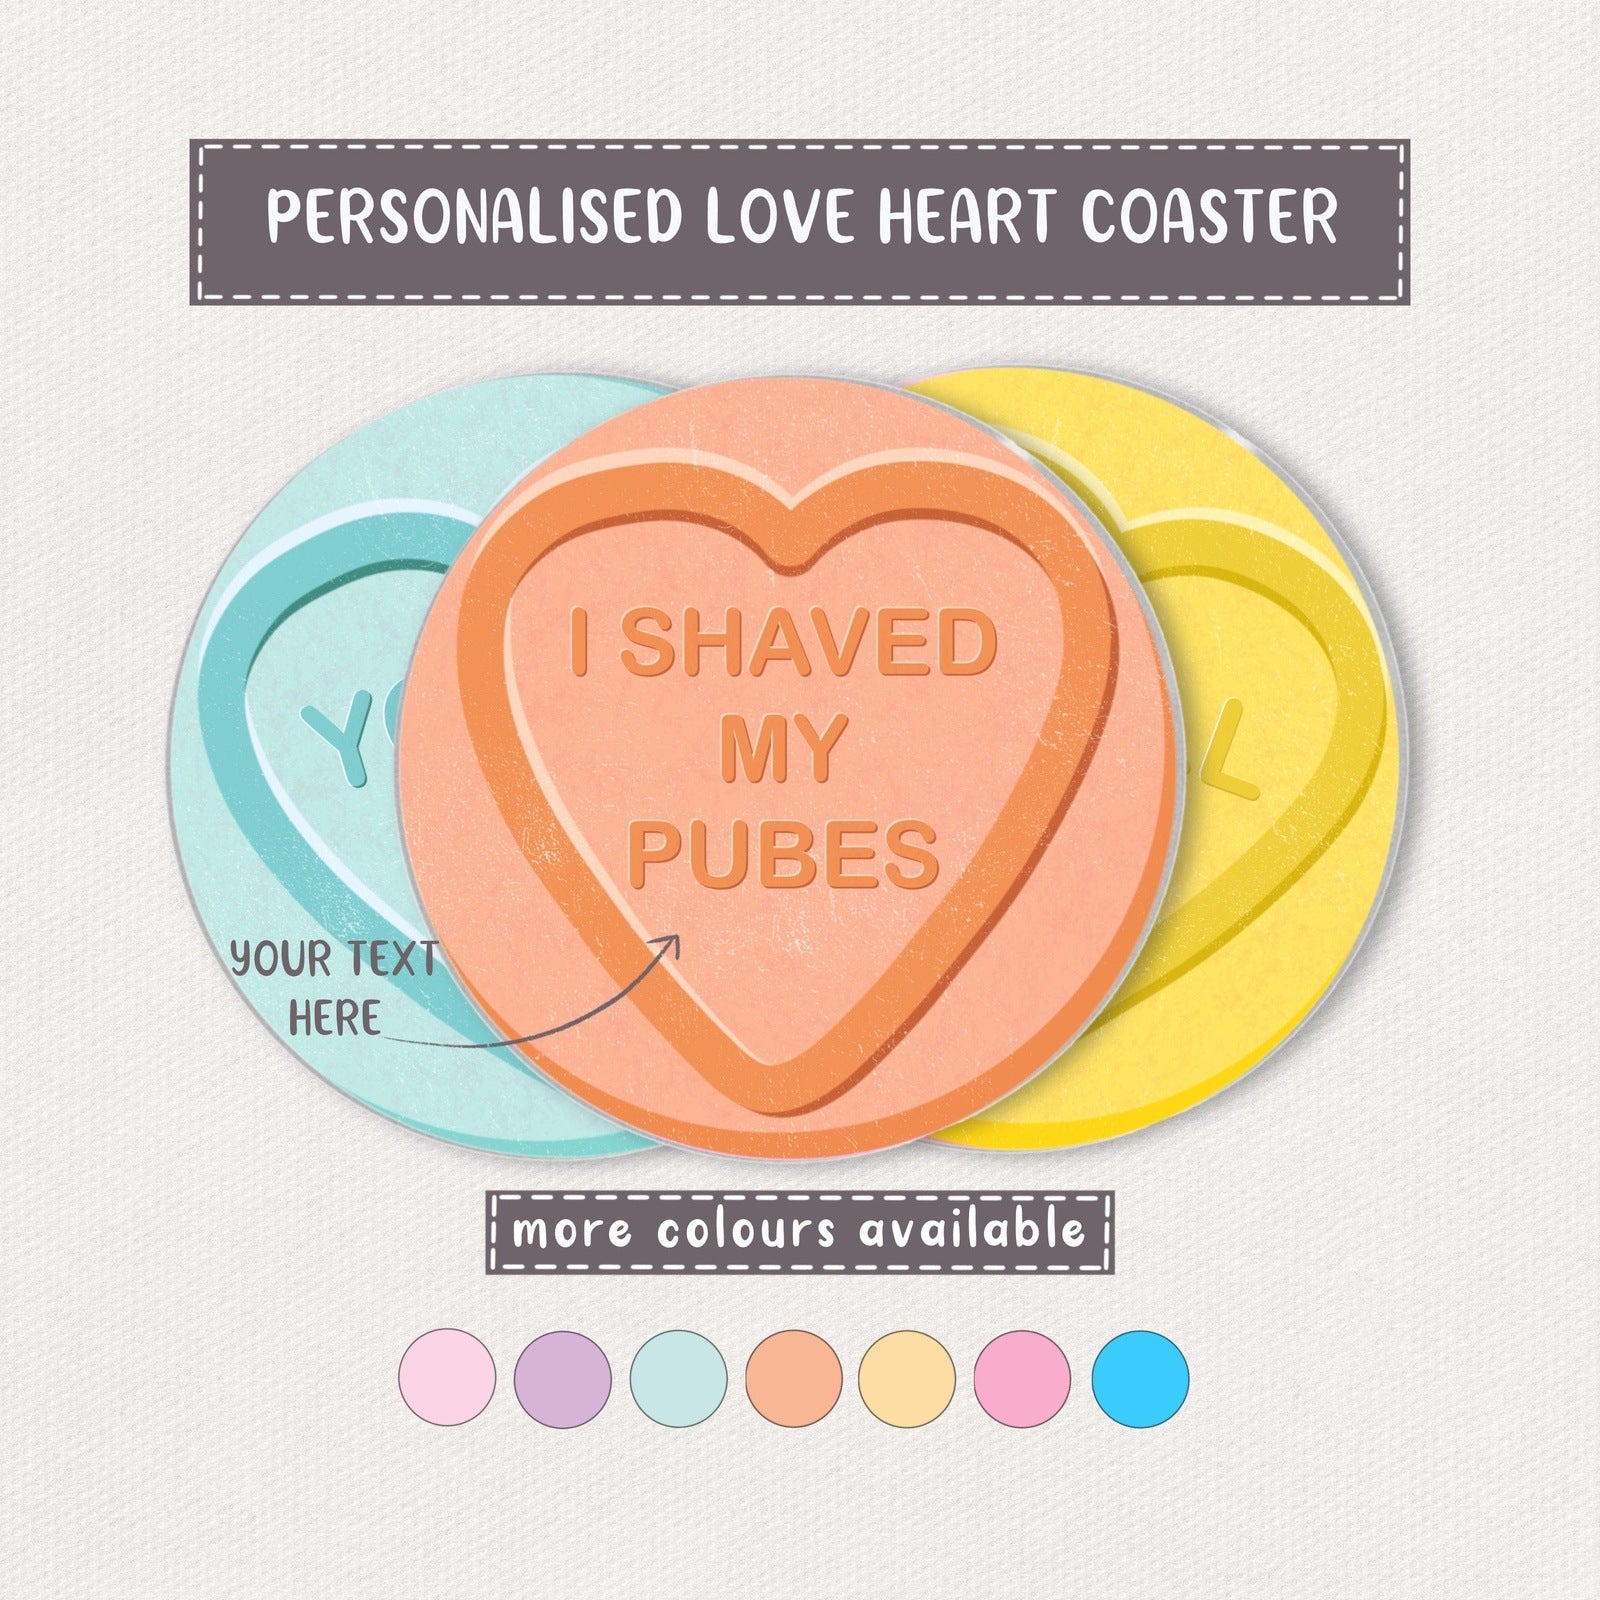 "I Shaved My Pubes" Personalised Love Heart Coaster